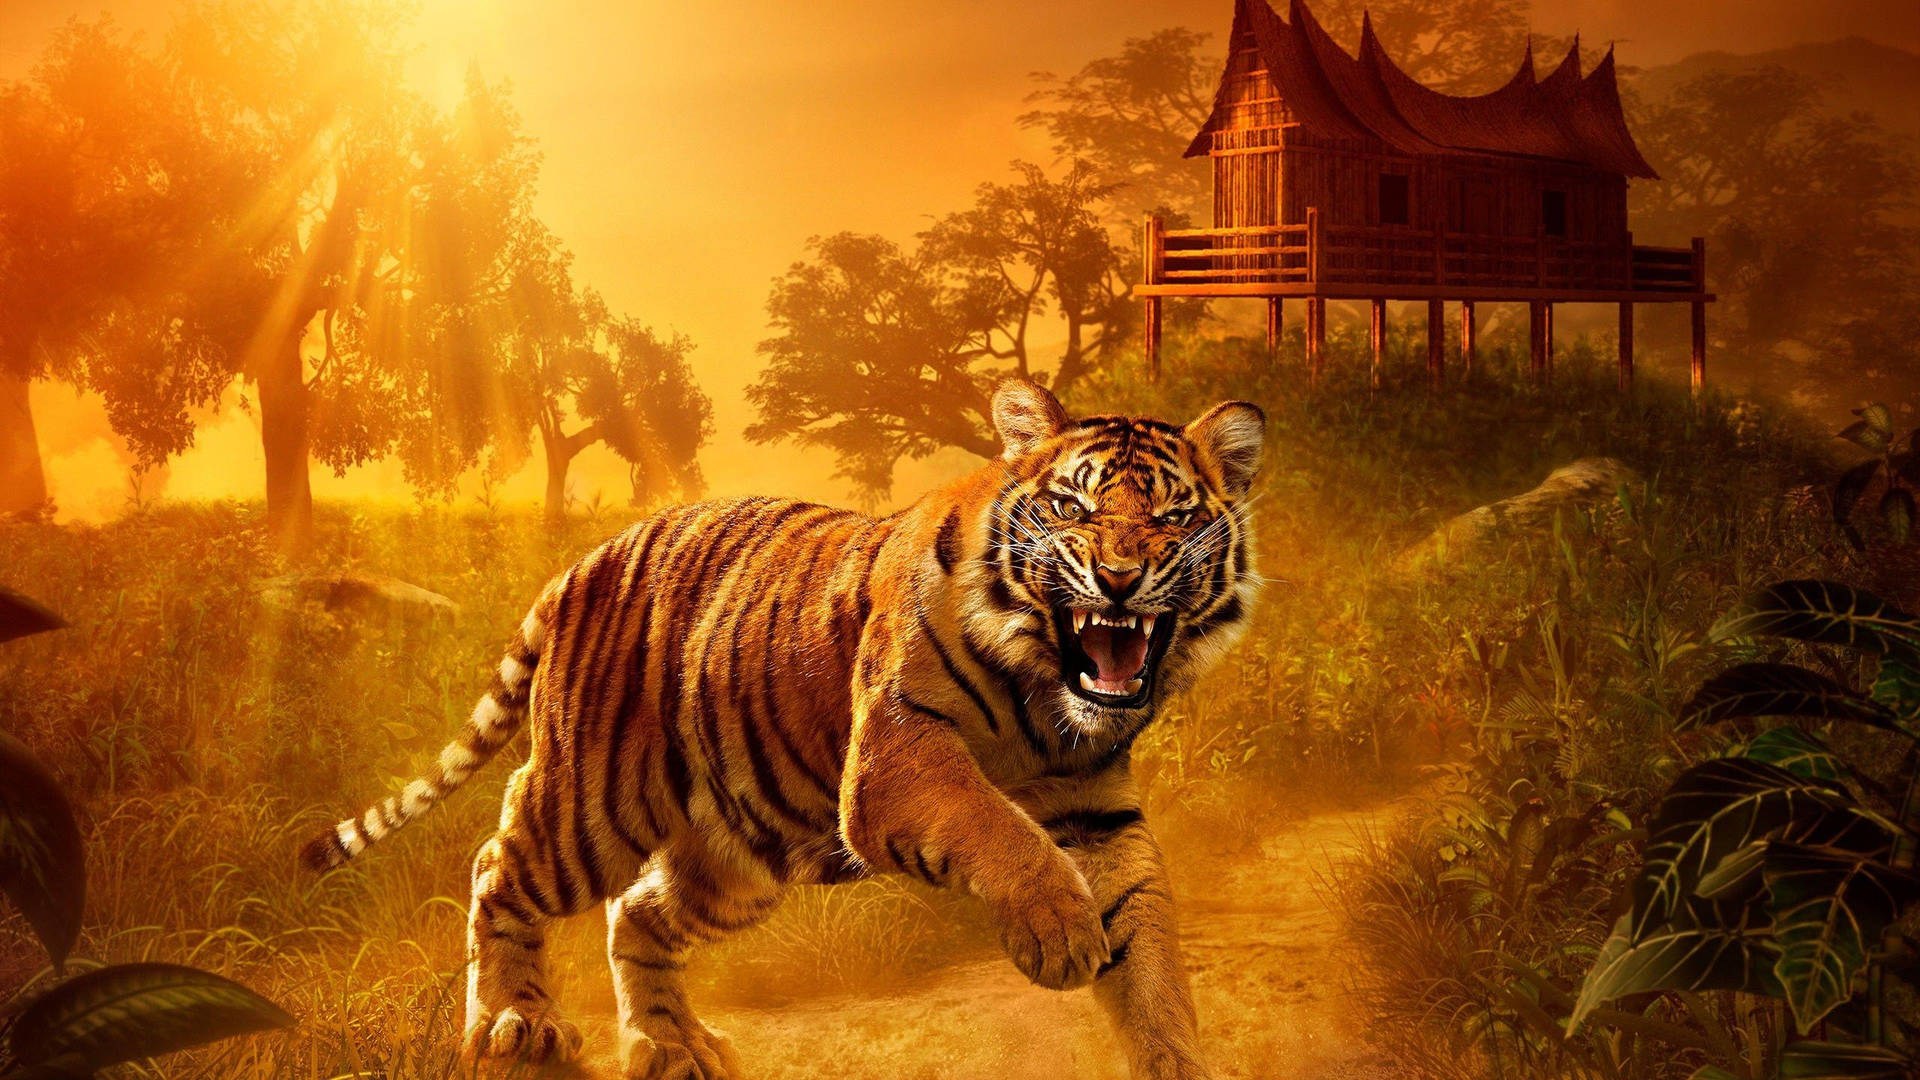 Angry Tiger Sunset Painting Wallpaper